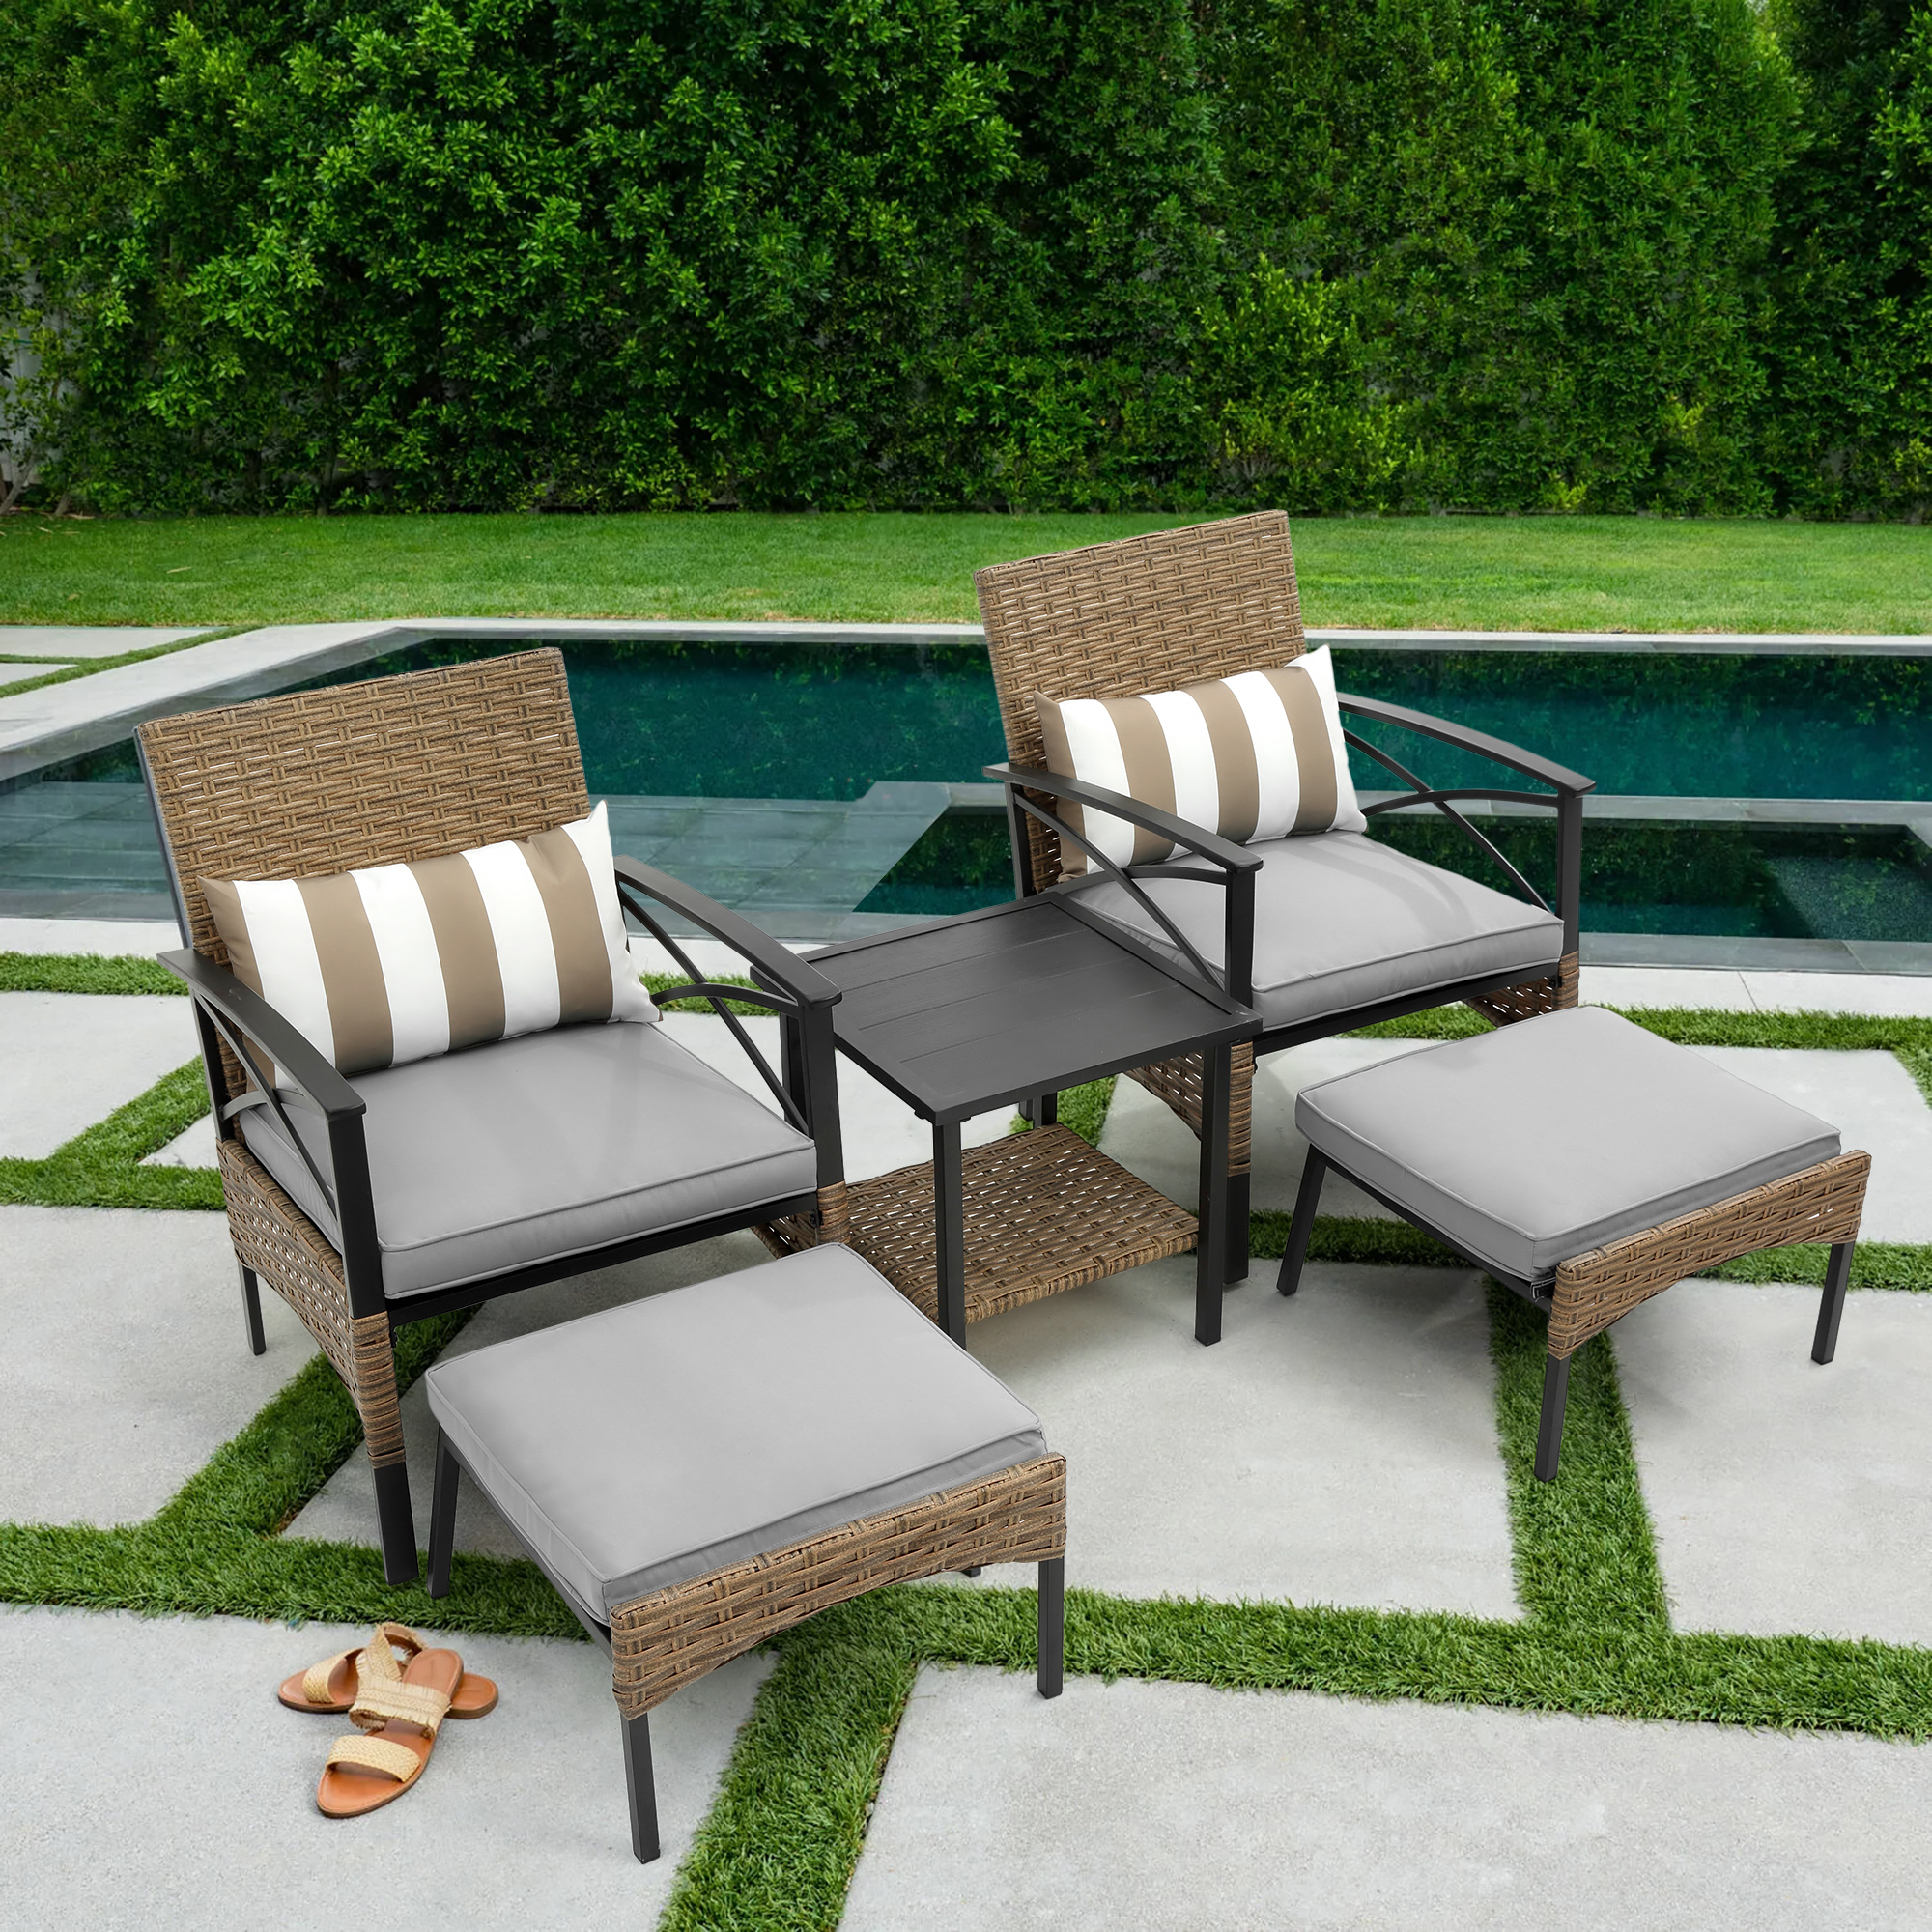 Patio Outdoor Furniture Chair Set, 5 PCS Wicker Sectional Sofa Set, Garden Conversation Set with 2 Cushioned Chairs, 2 Footstools & Tea Table, Lawn Pool Balcony Deck Yard Porch Chat Set - image 1 of 9